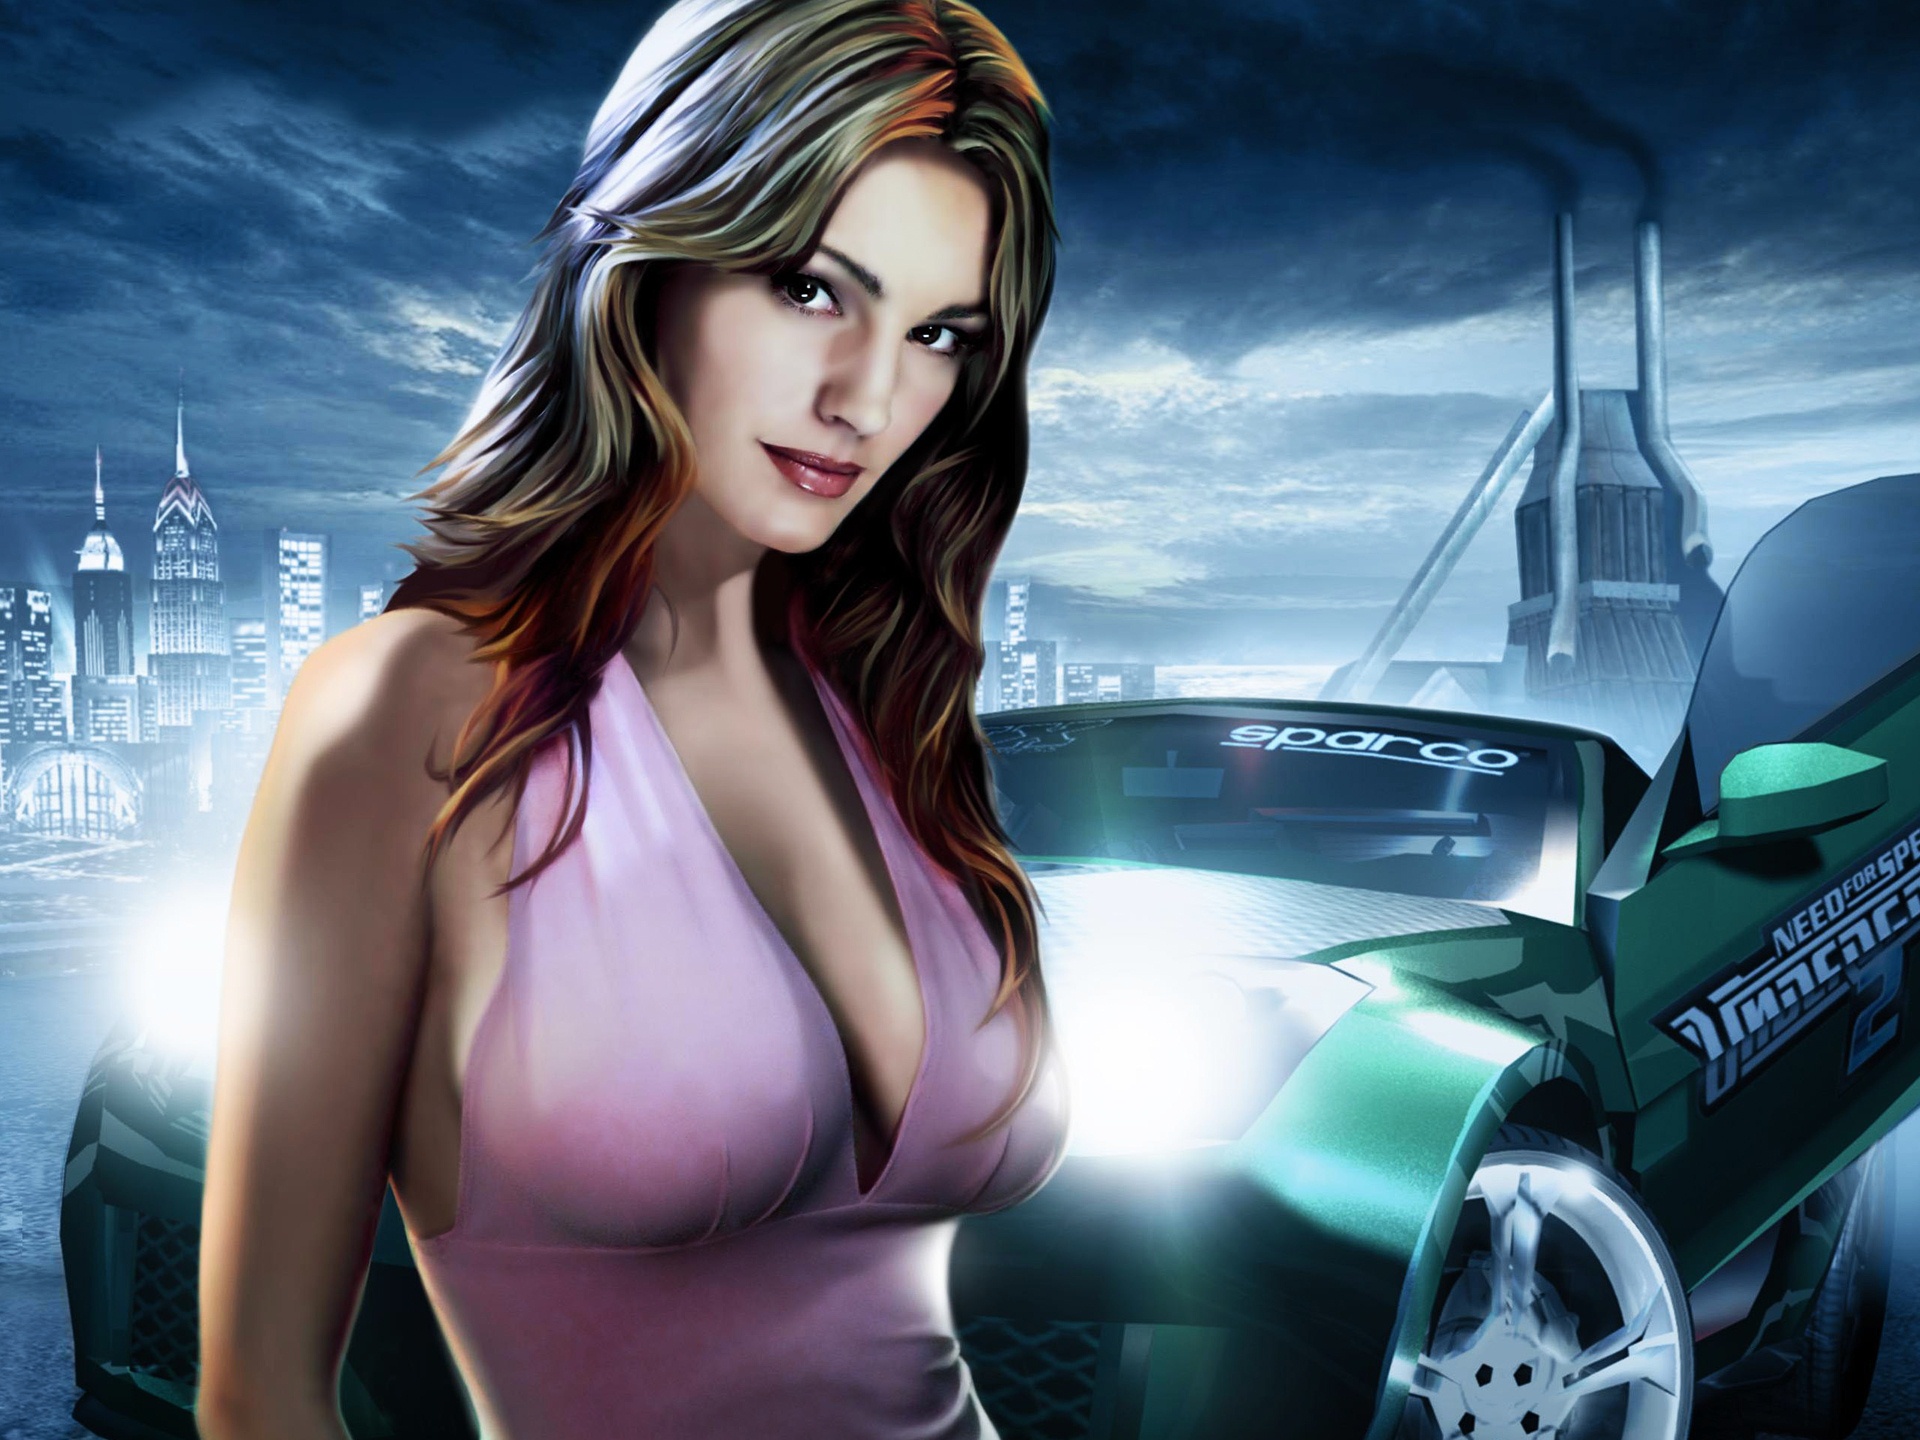 Need For Speed Girl Wallpaper HD